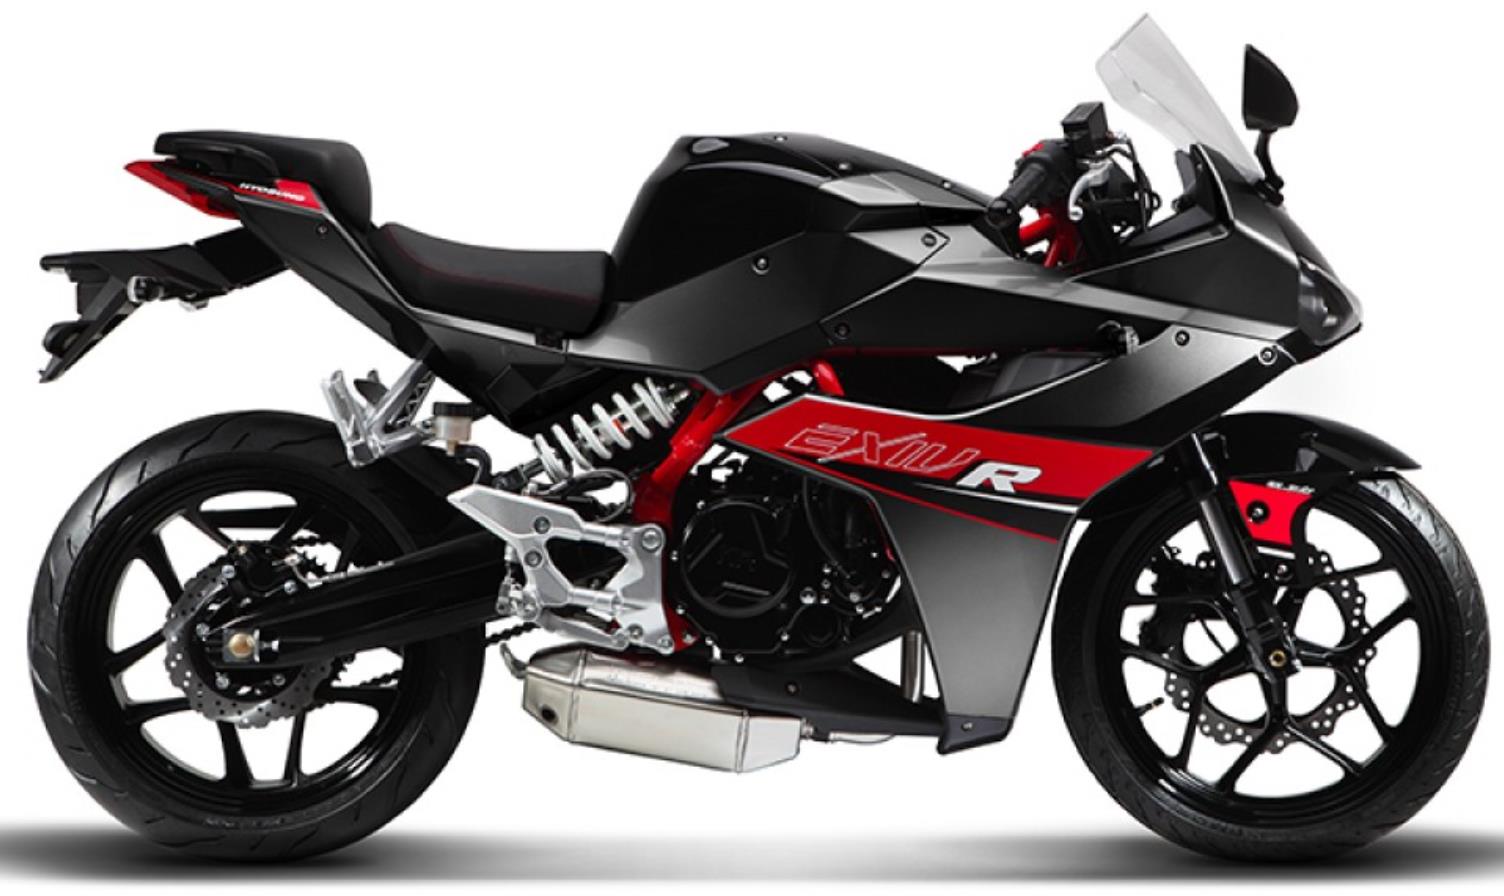 Hyosung GD250R Price in India, Specifications & Photos